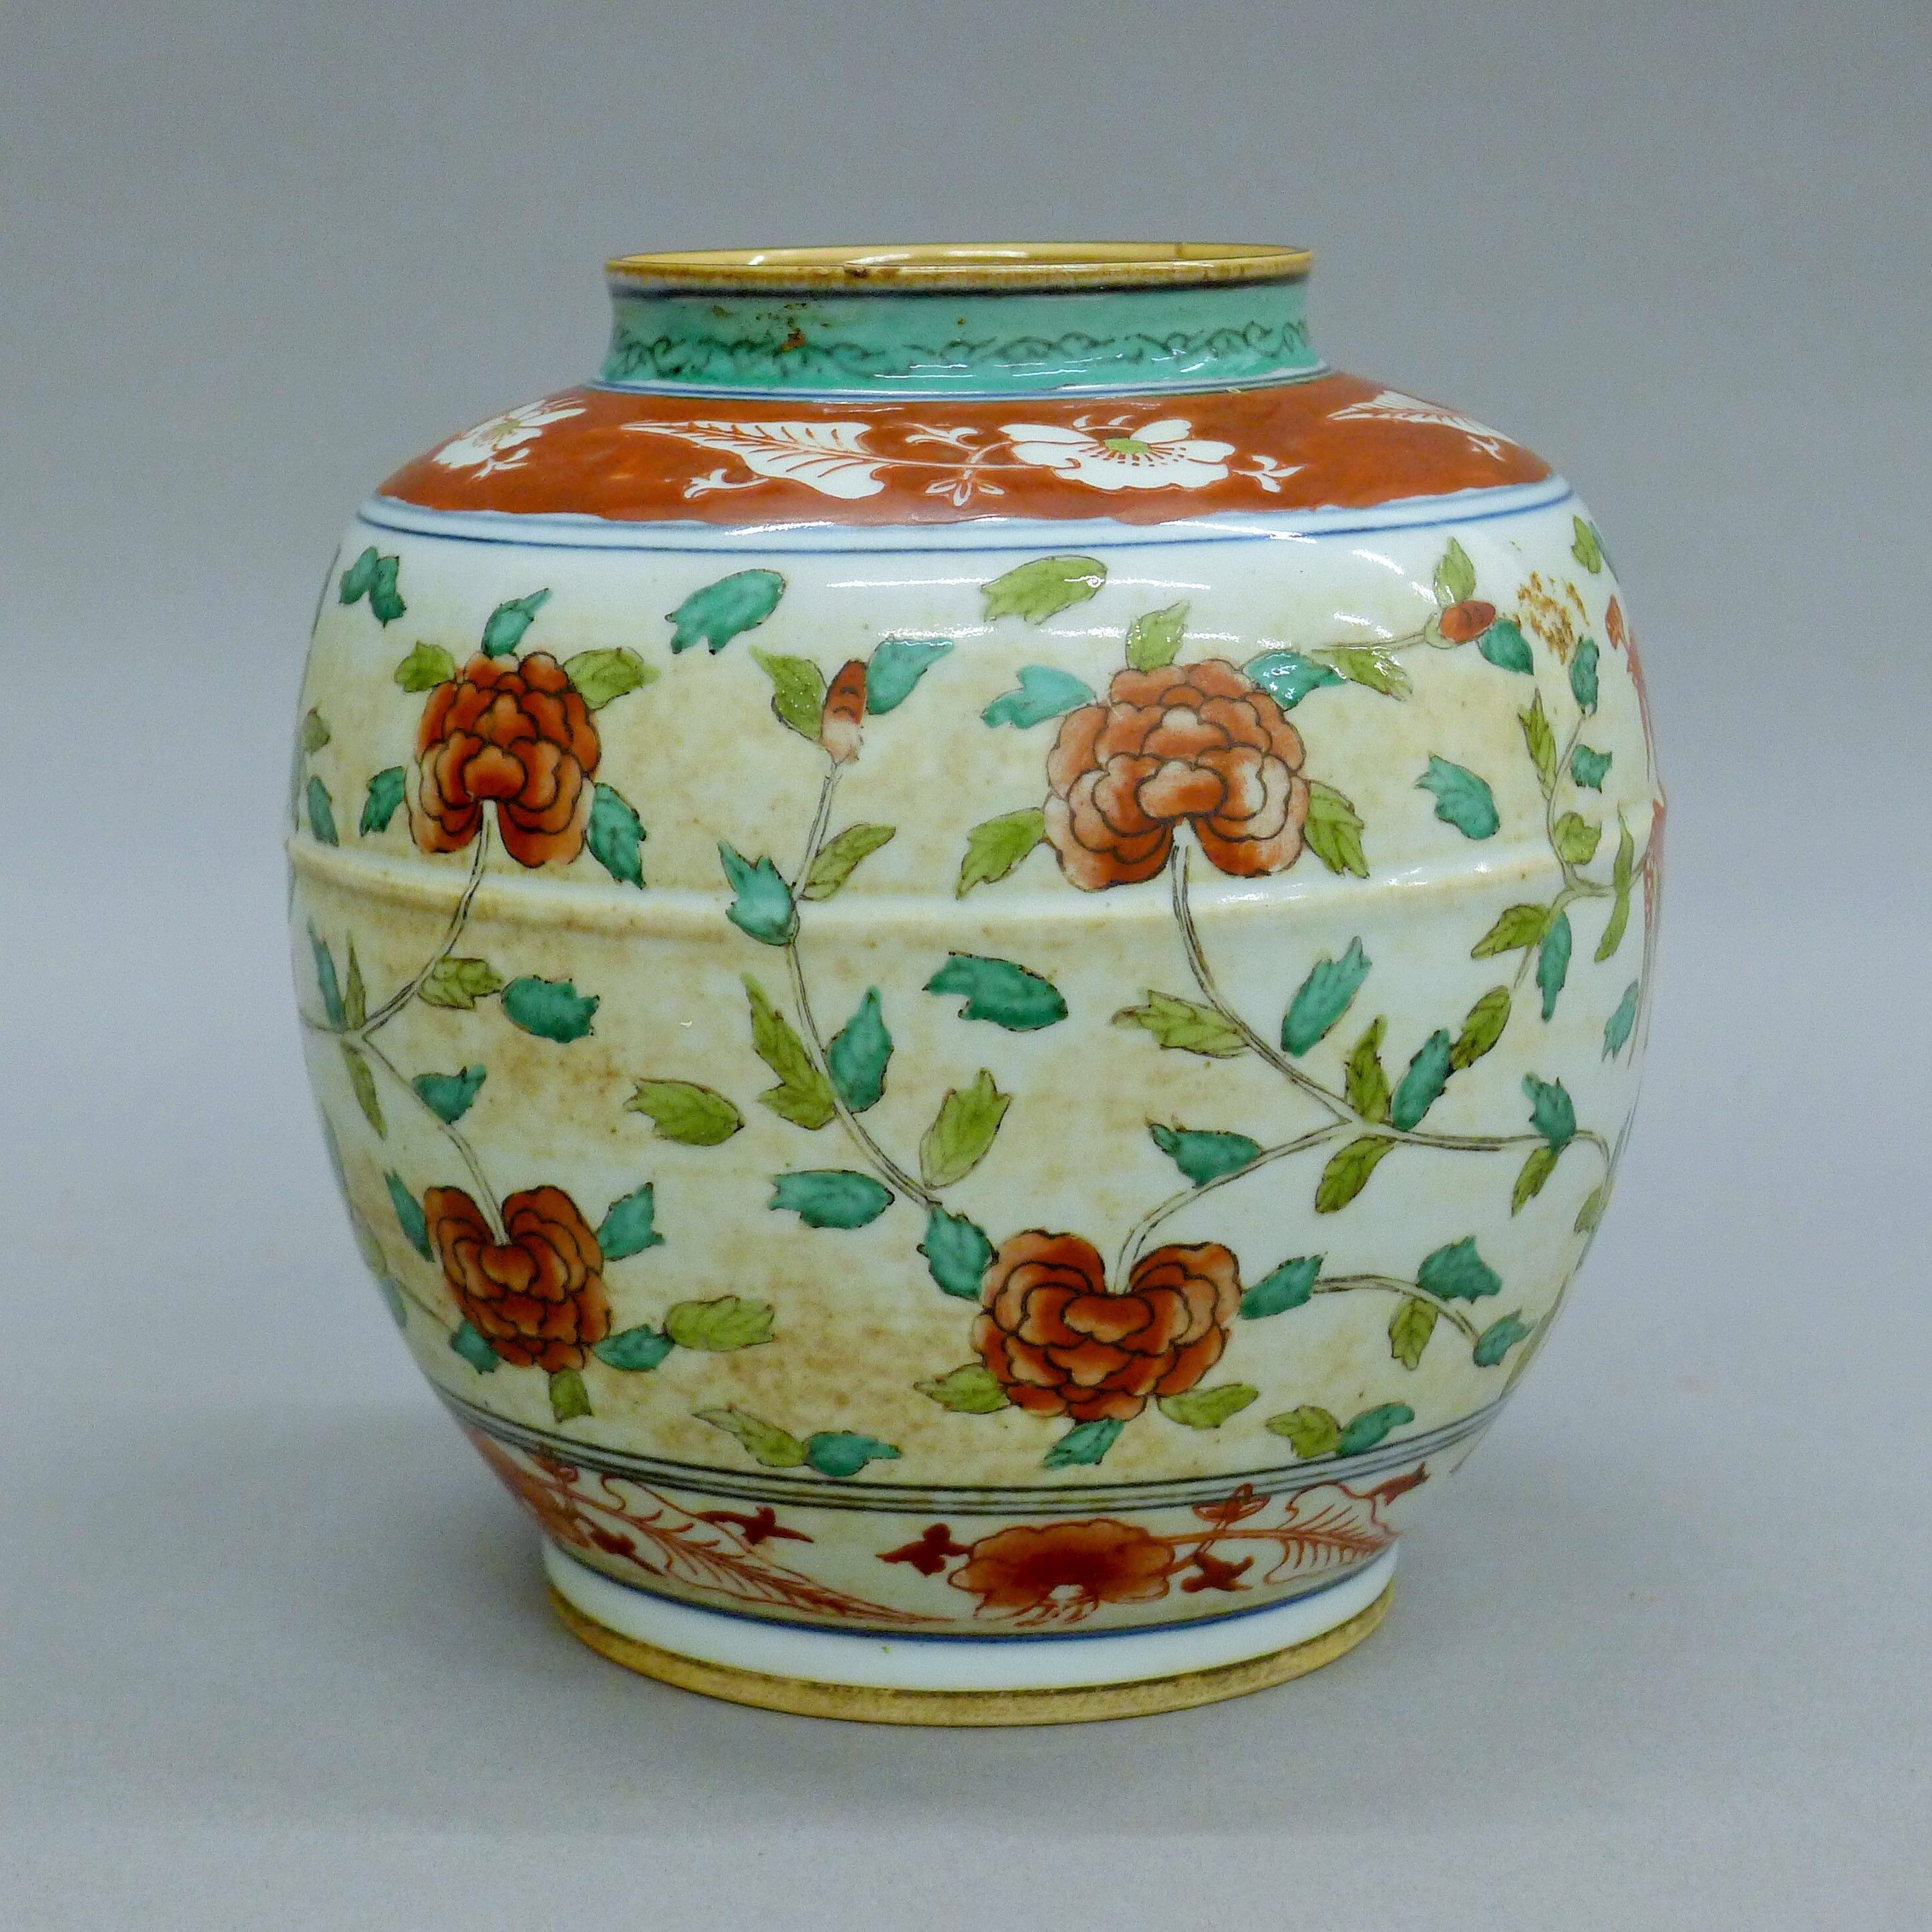 A 20th century Chinese Wucai enamelled ginger jar depicting a pair of phoenixes amongst a floral - Image 3 of 7